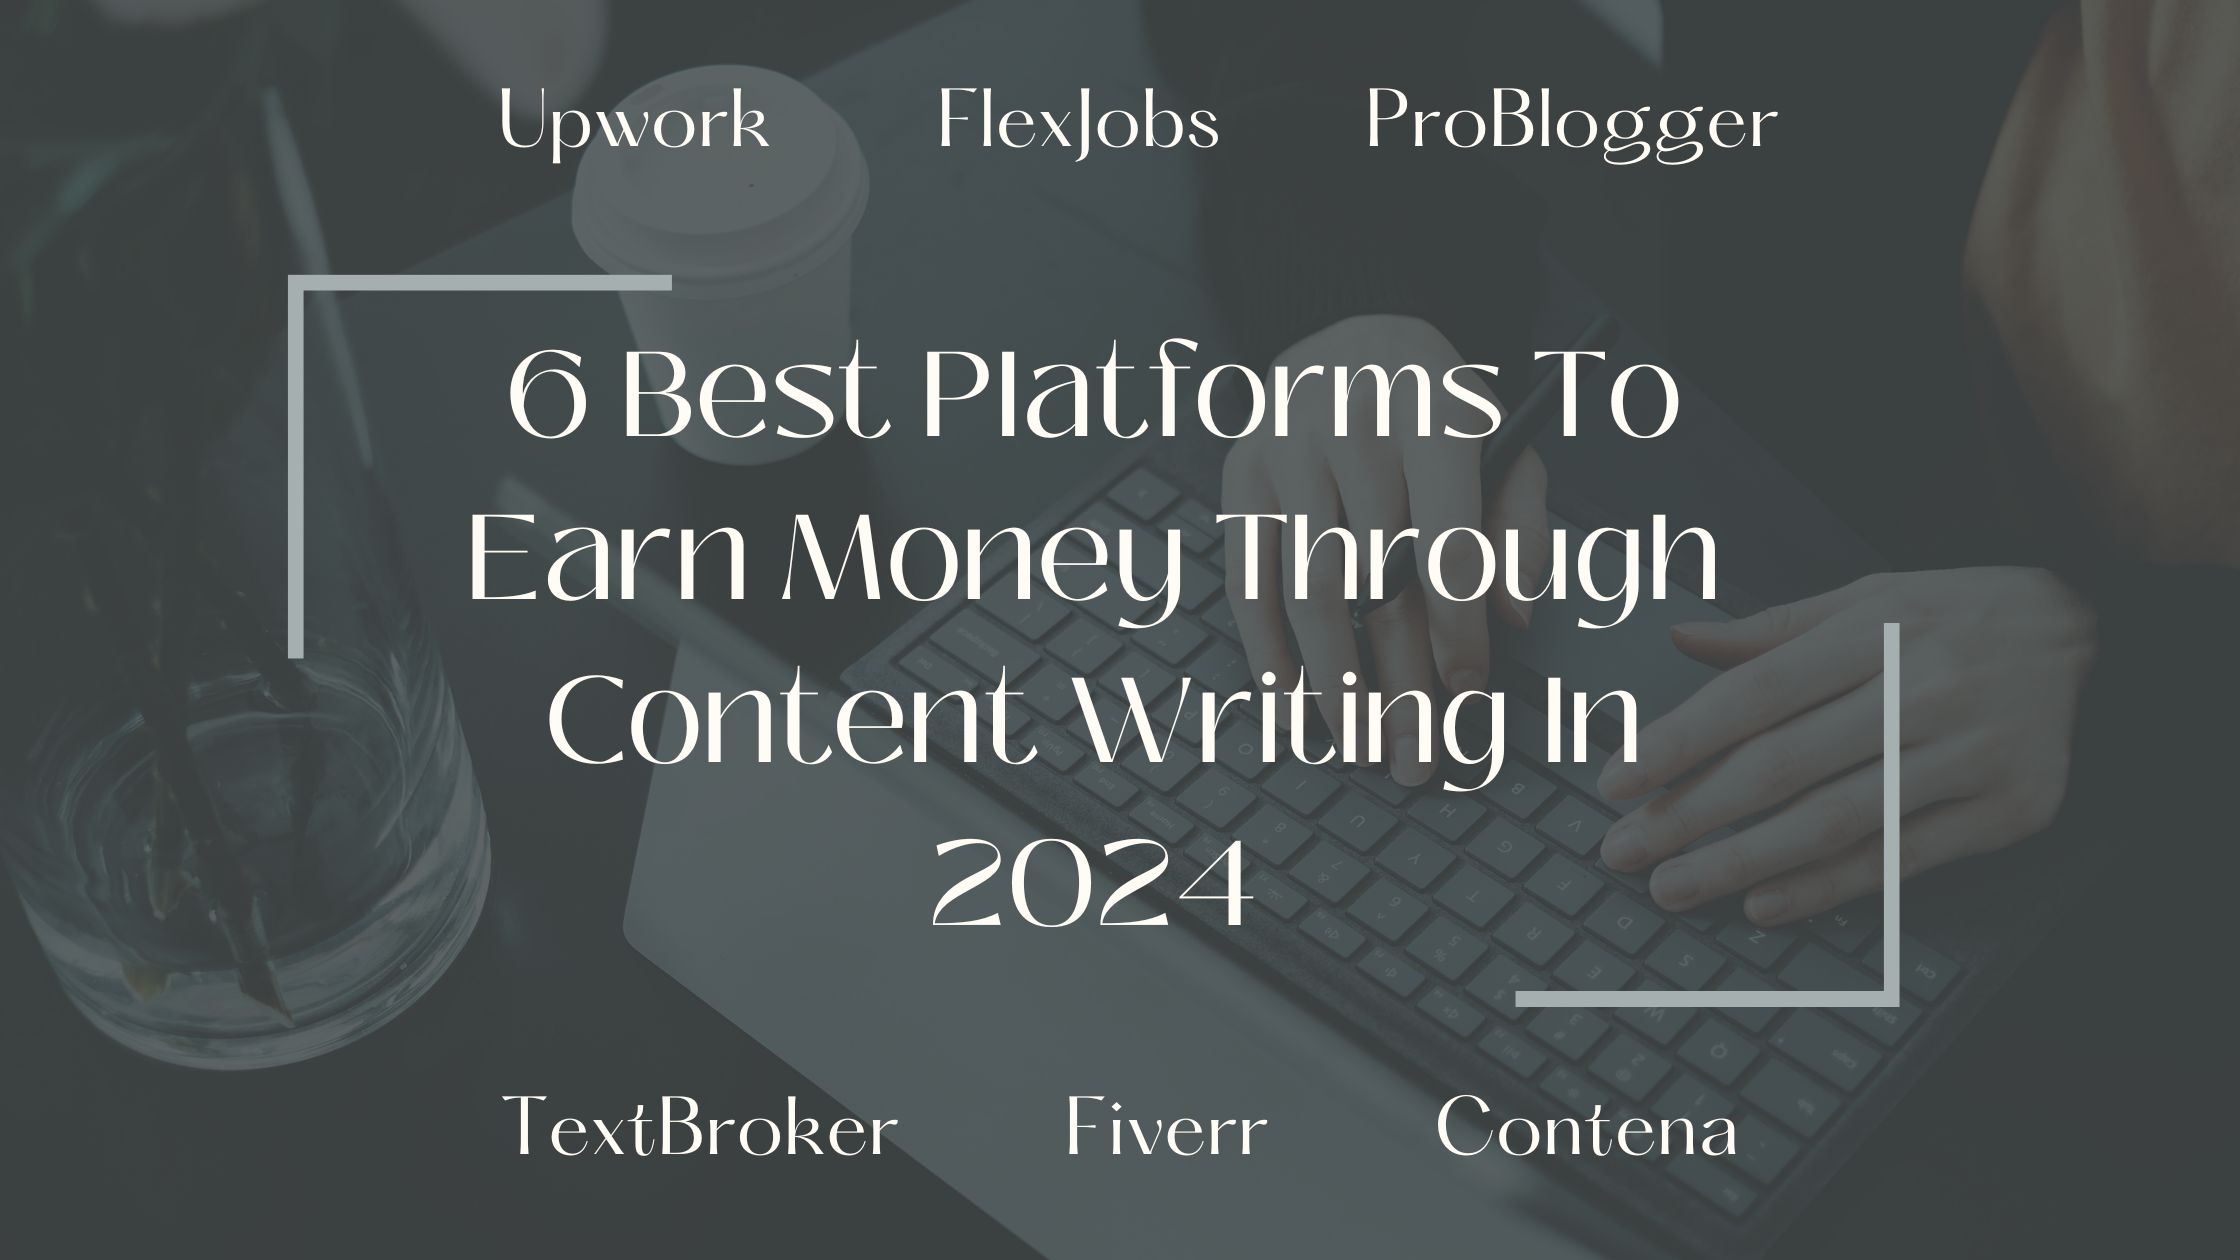 Platforms To Earn Money Through Content Writing